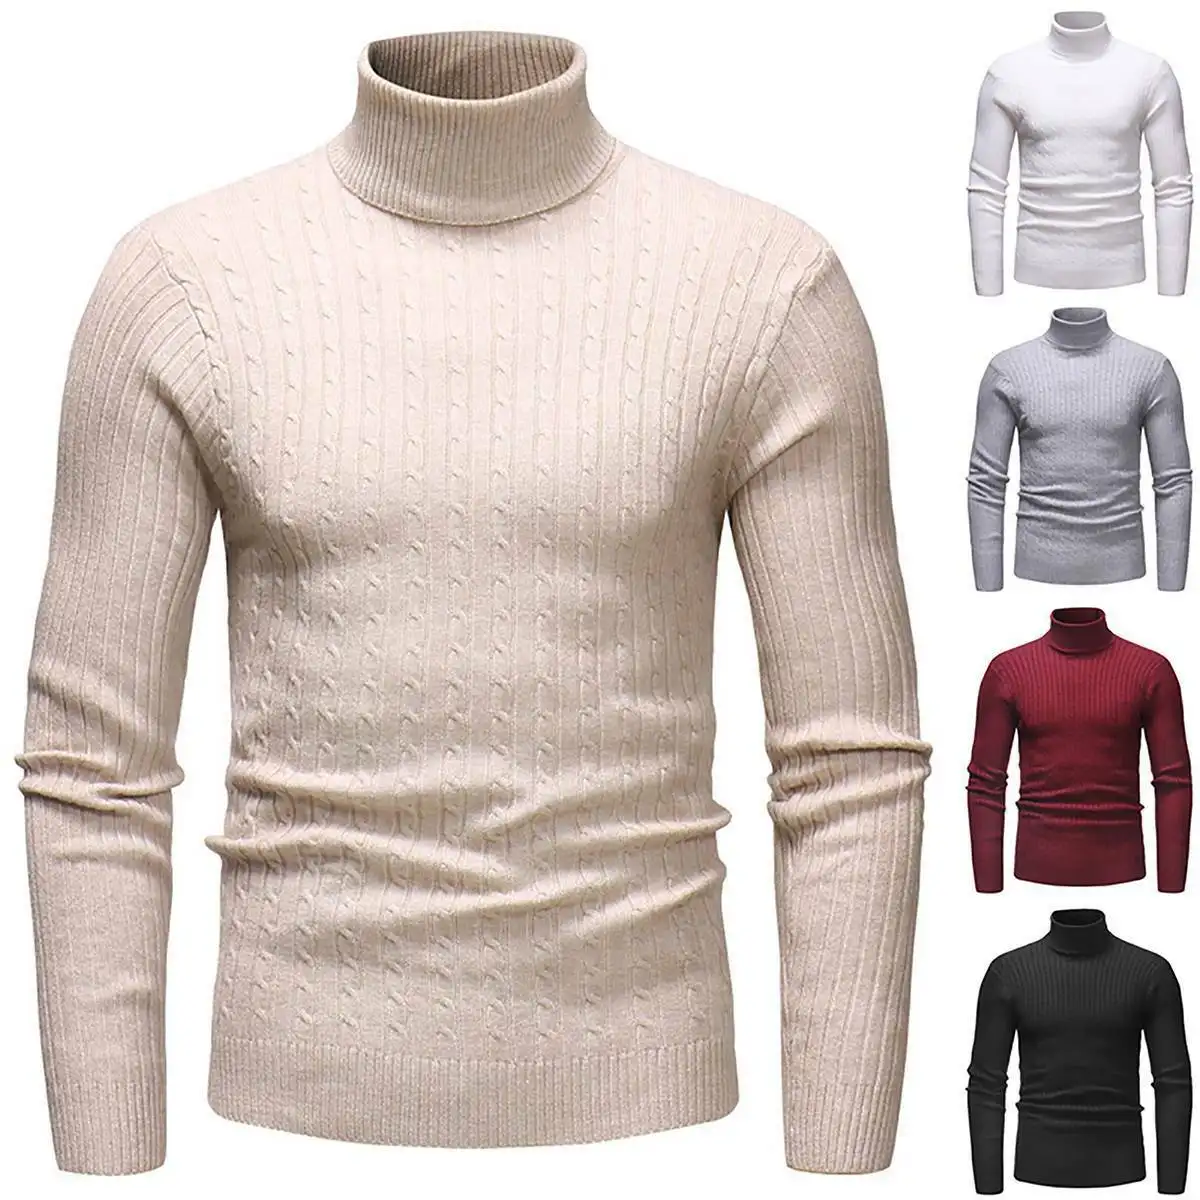 Winter high neck warm sweater/slim fit pullover men knitwear male double collar high neck